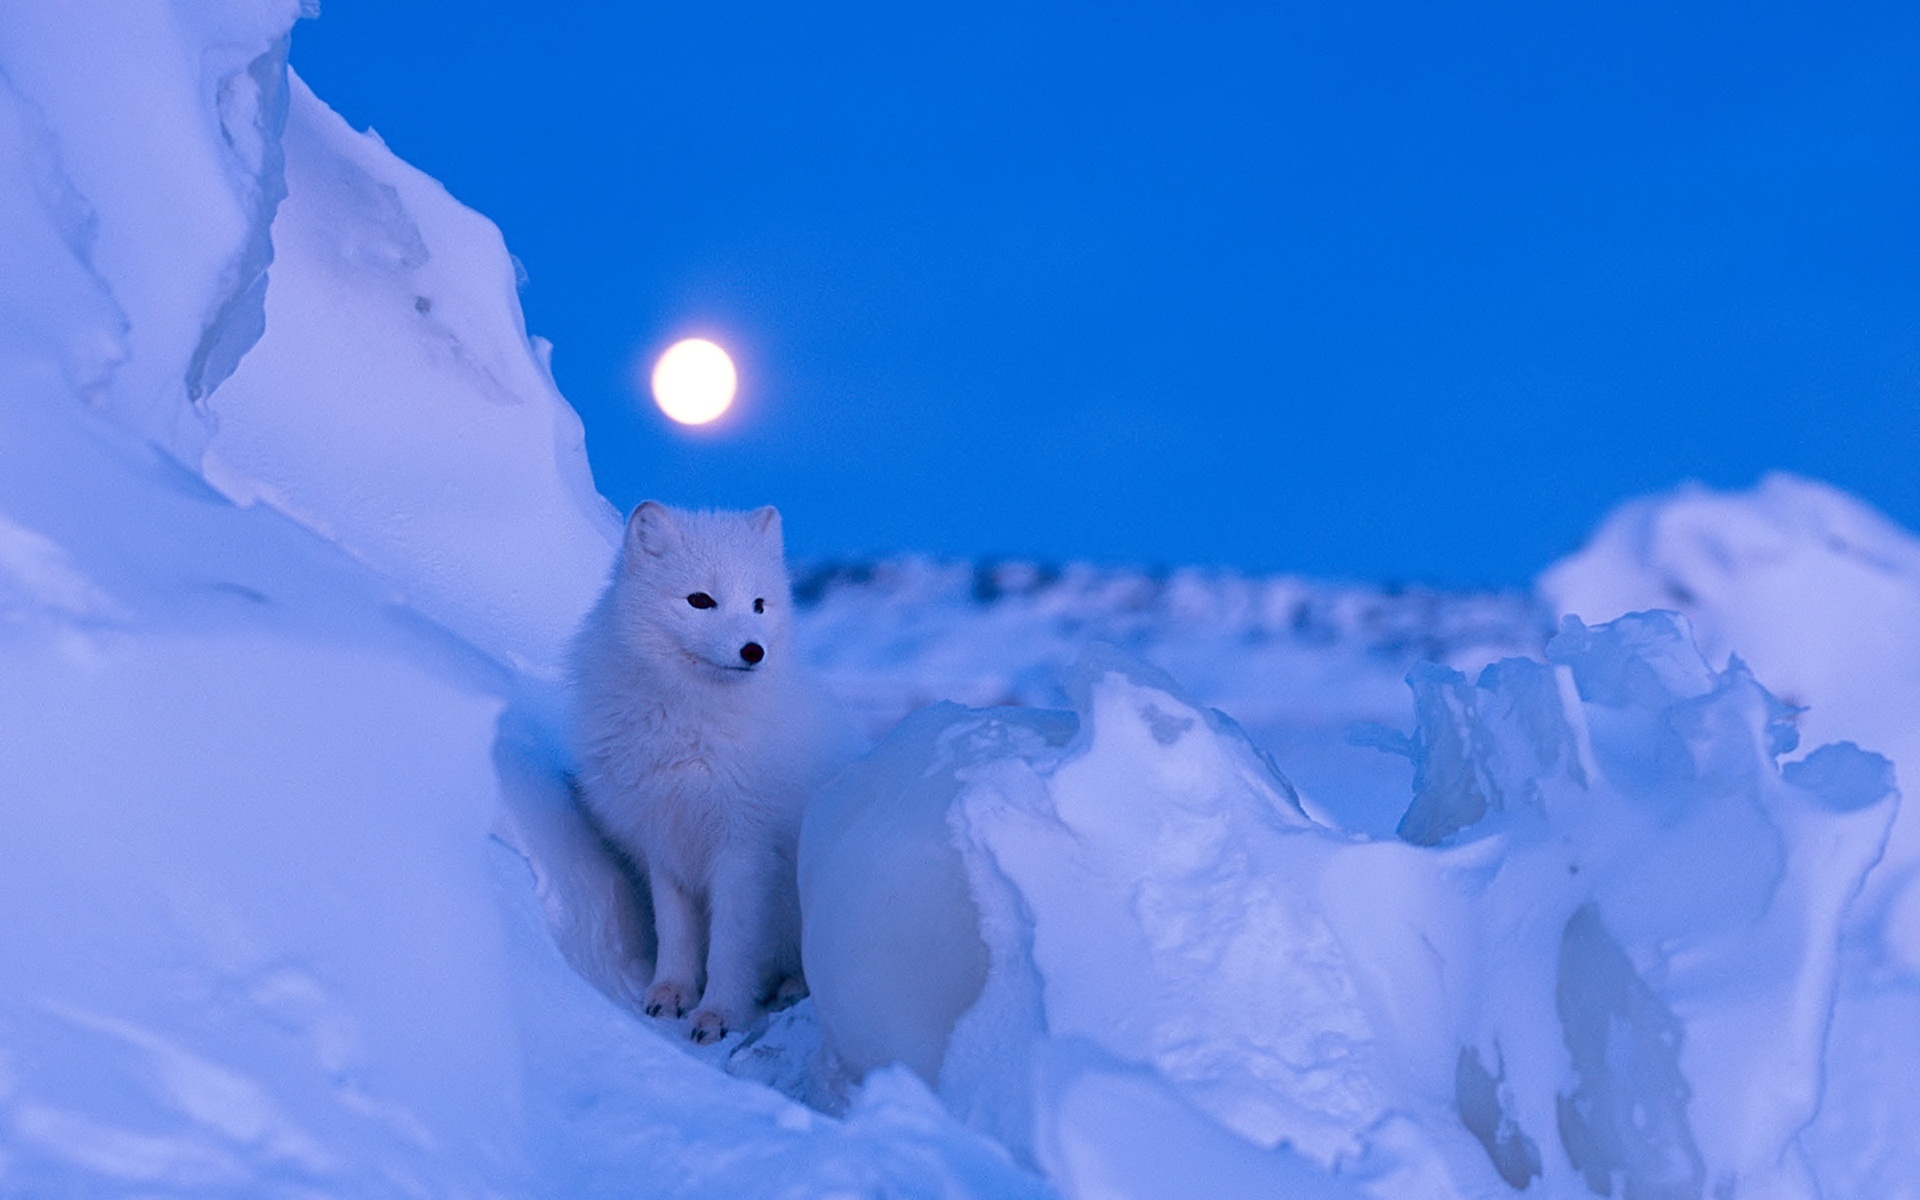 Arctic fox wallpapers, Extensive collection, Diverse options, Variety of choices, 1920x1200 HD Desktop